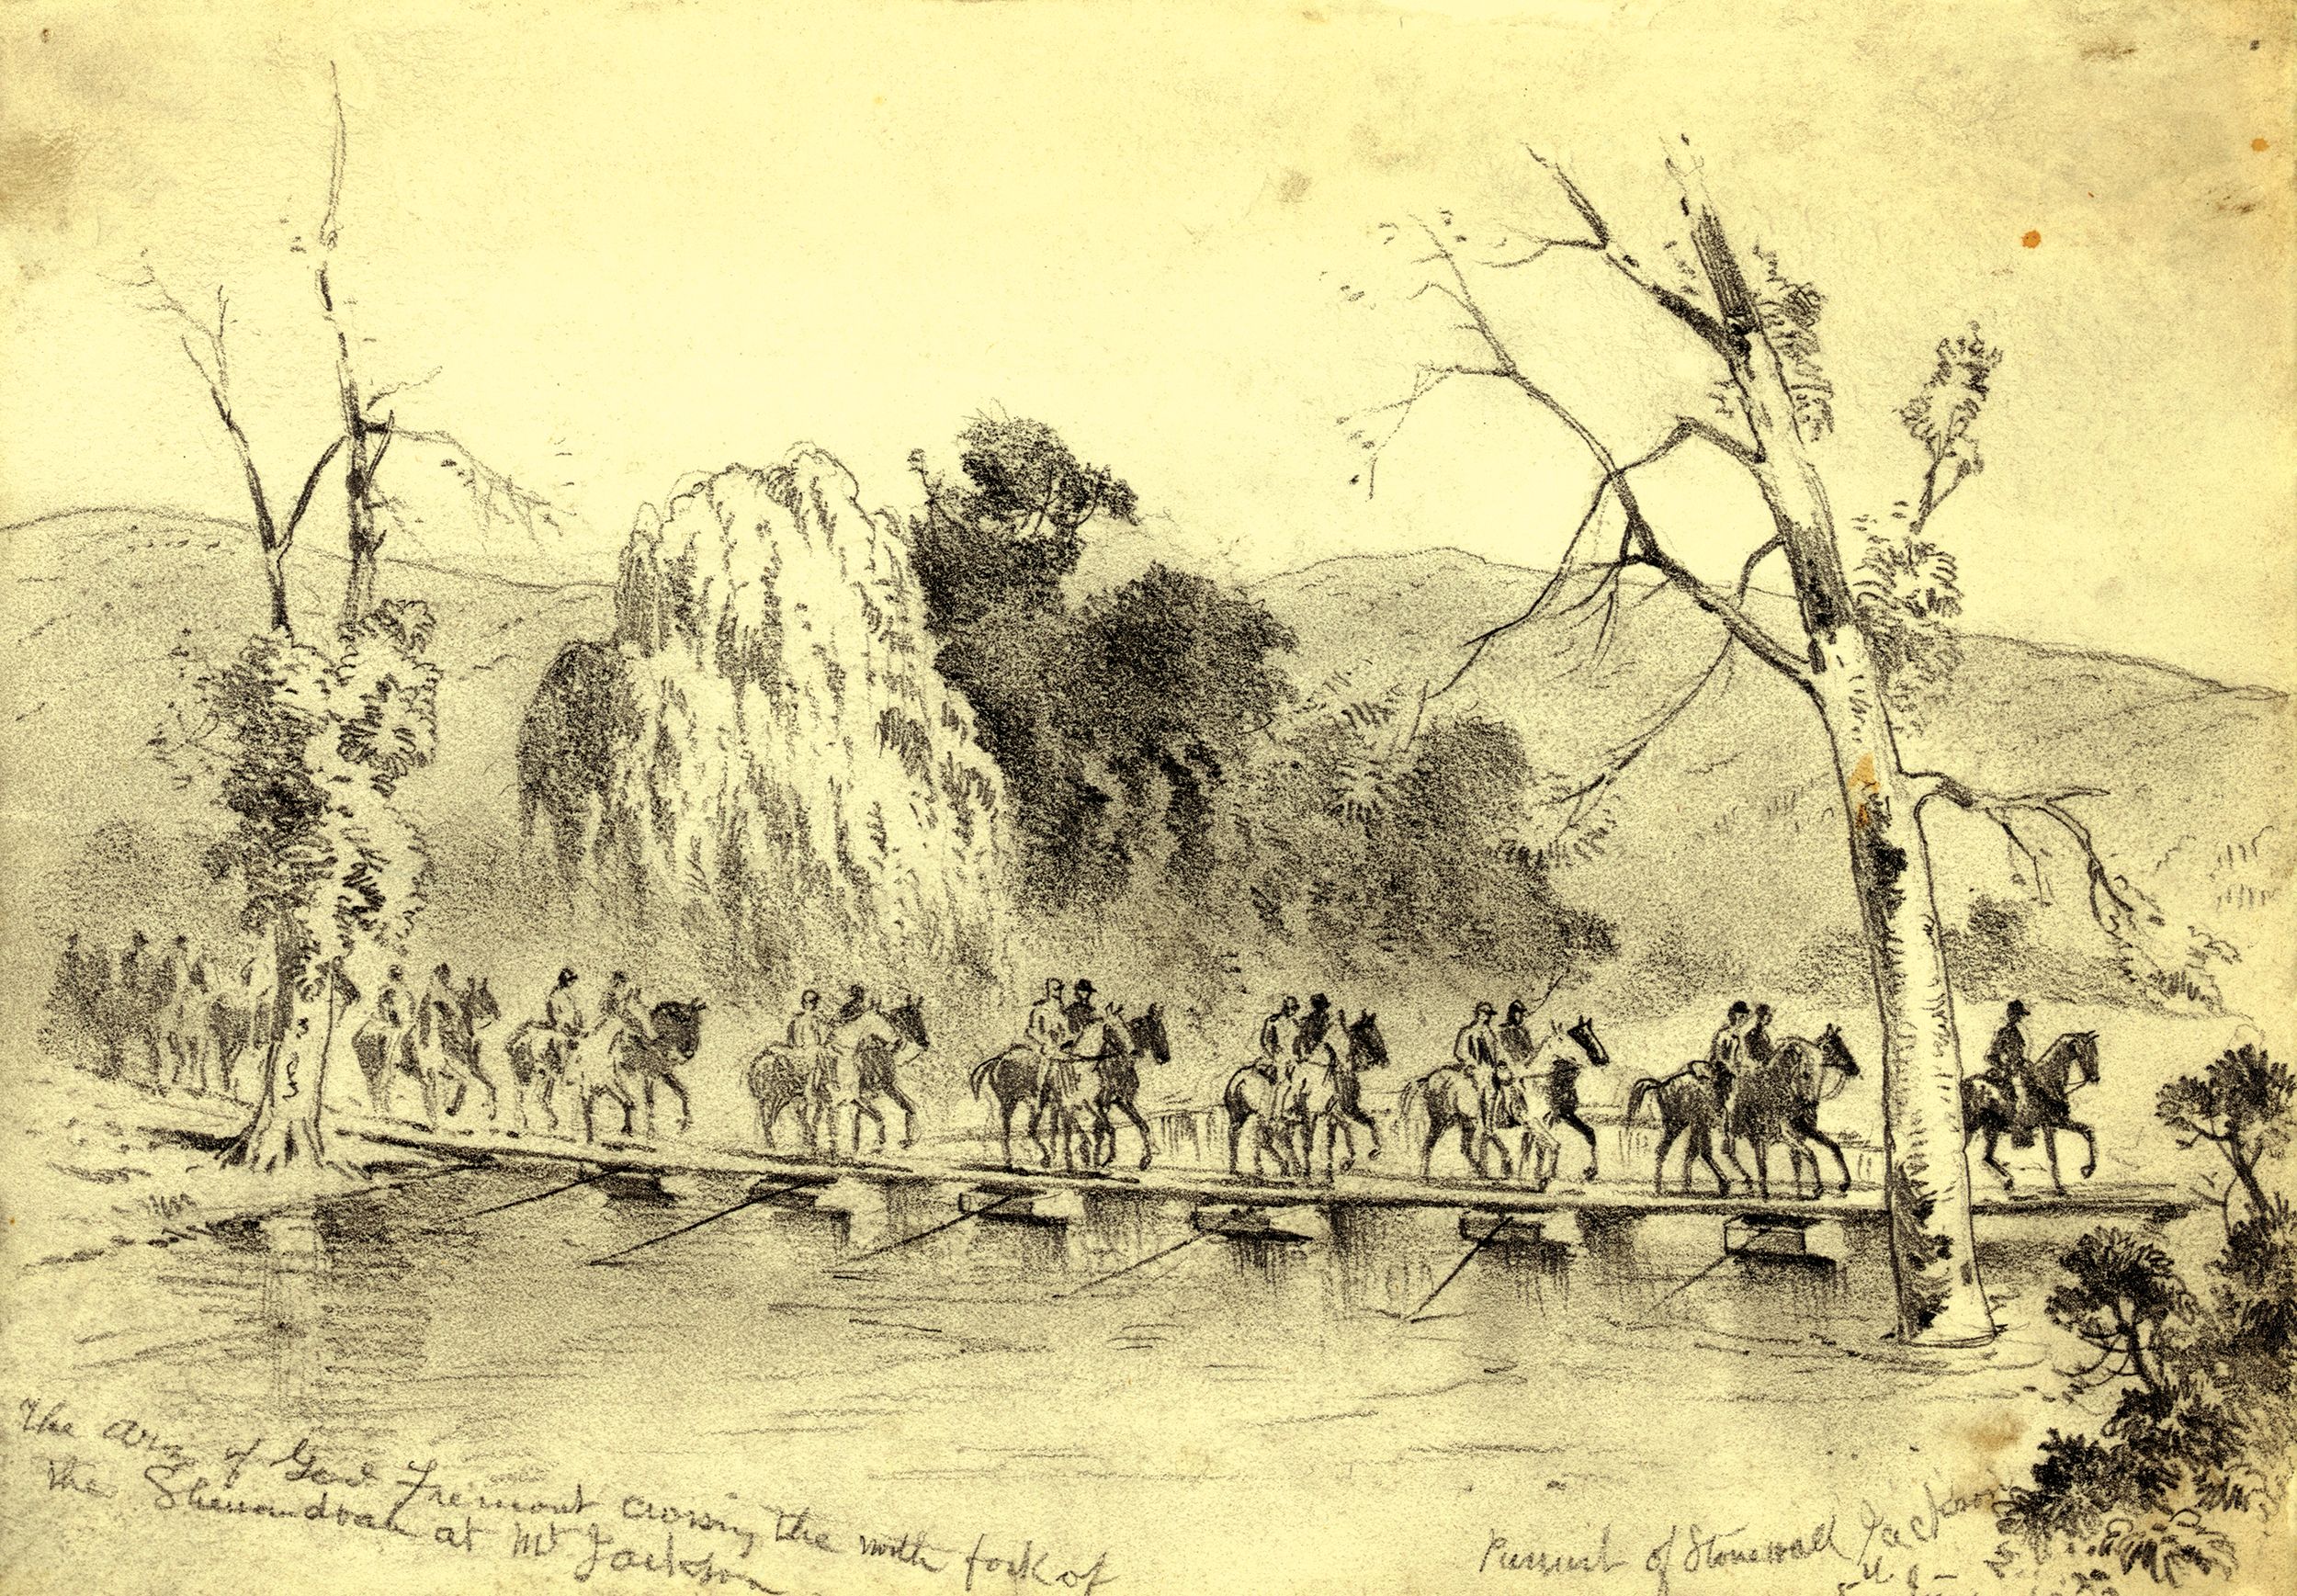 “The army of General Fremont crossing the north fork of the Shenandoah at Mt. Jackson—Pursuit of Stonewall Jackson” by Edwin Forbes, June 5, 1862. 